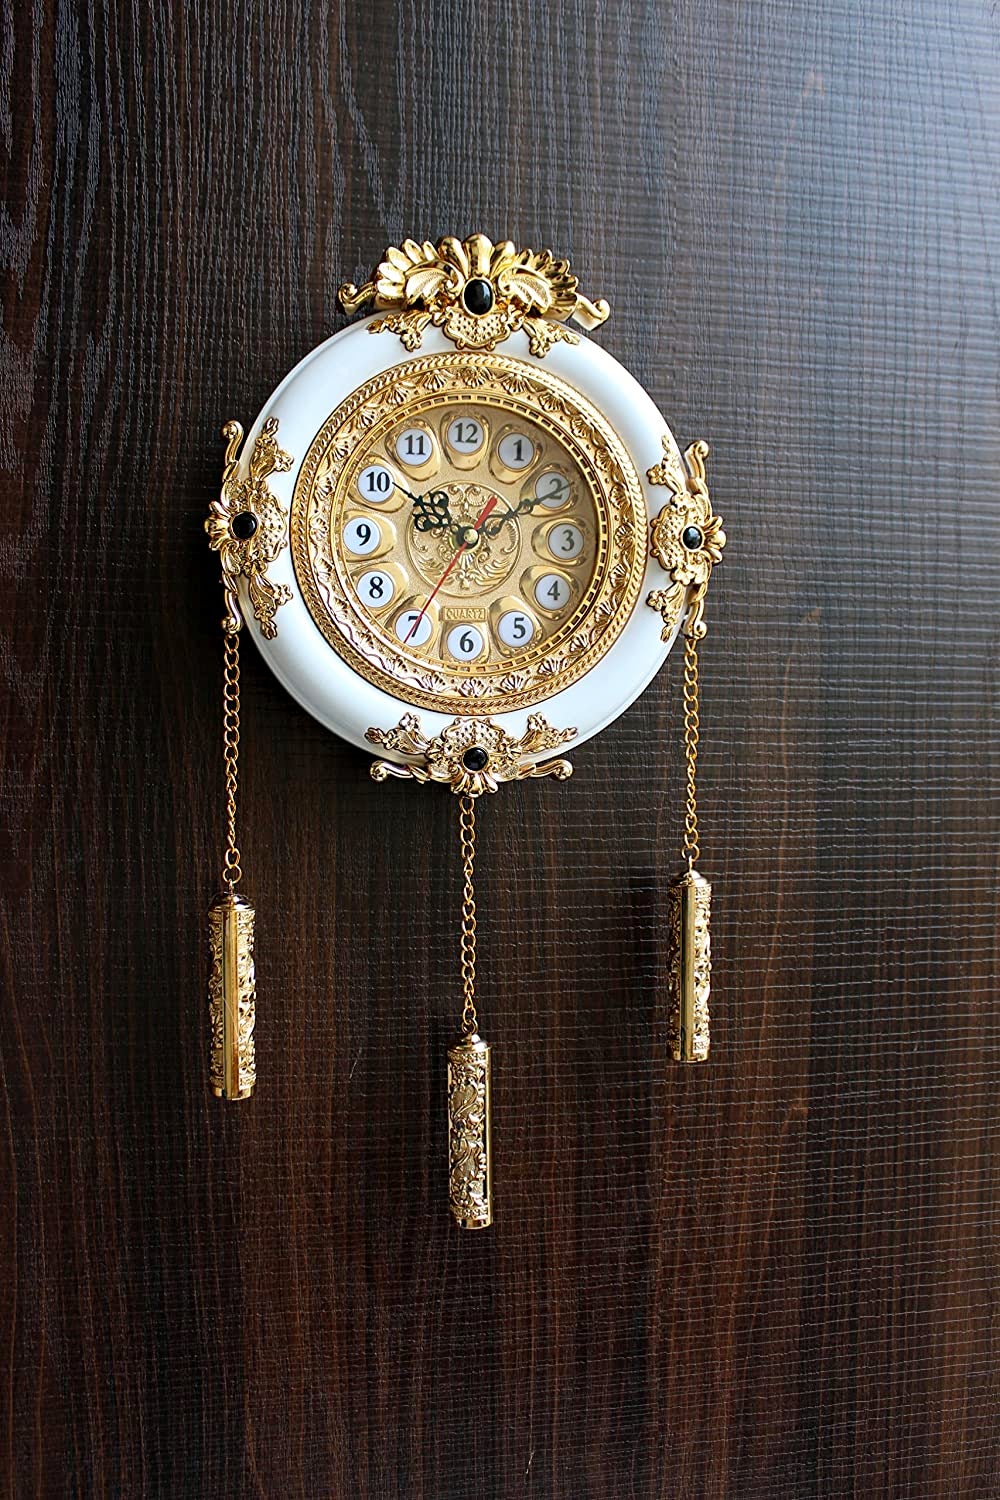 FunkyTradition Royal Designer Gold Plated White Premium String Hanging Wall Clock for Home Office Decor 43 cm Tall